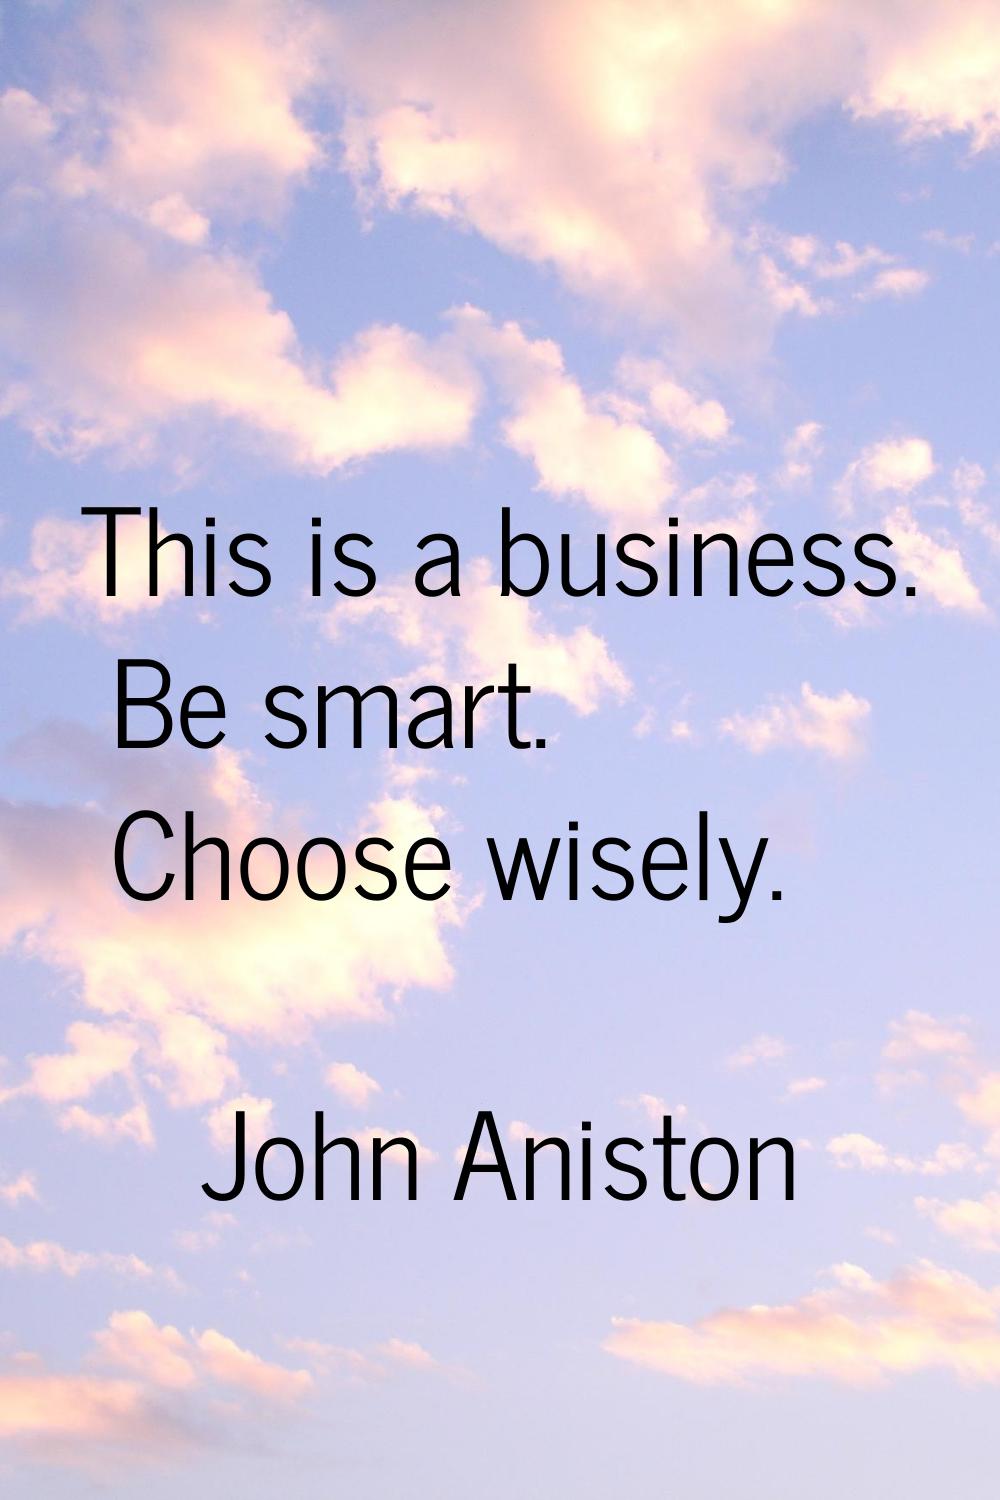 This is a business. Be smart. Choose wisely.